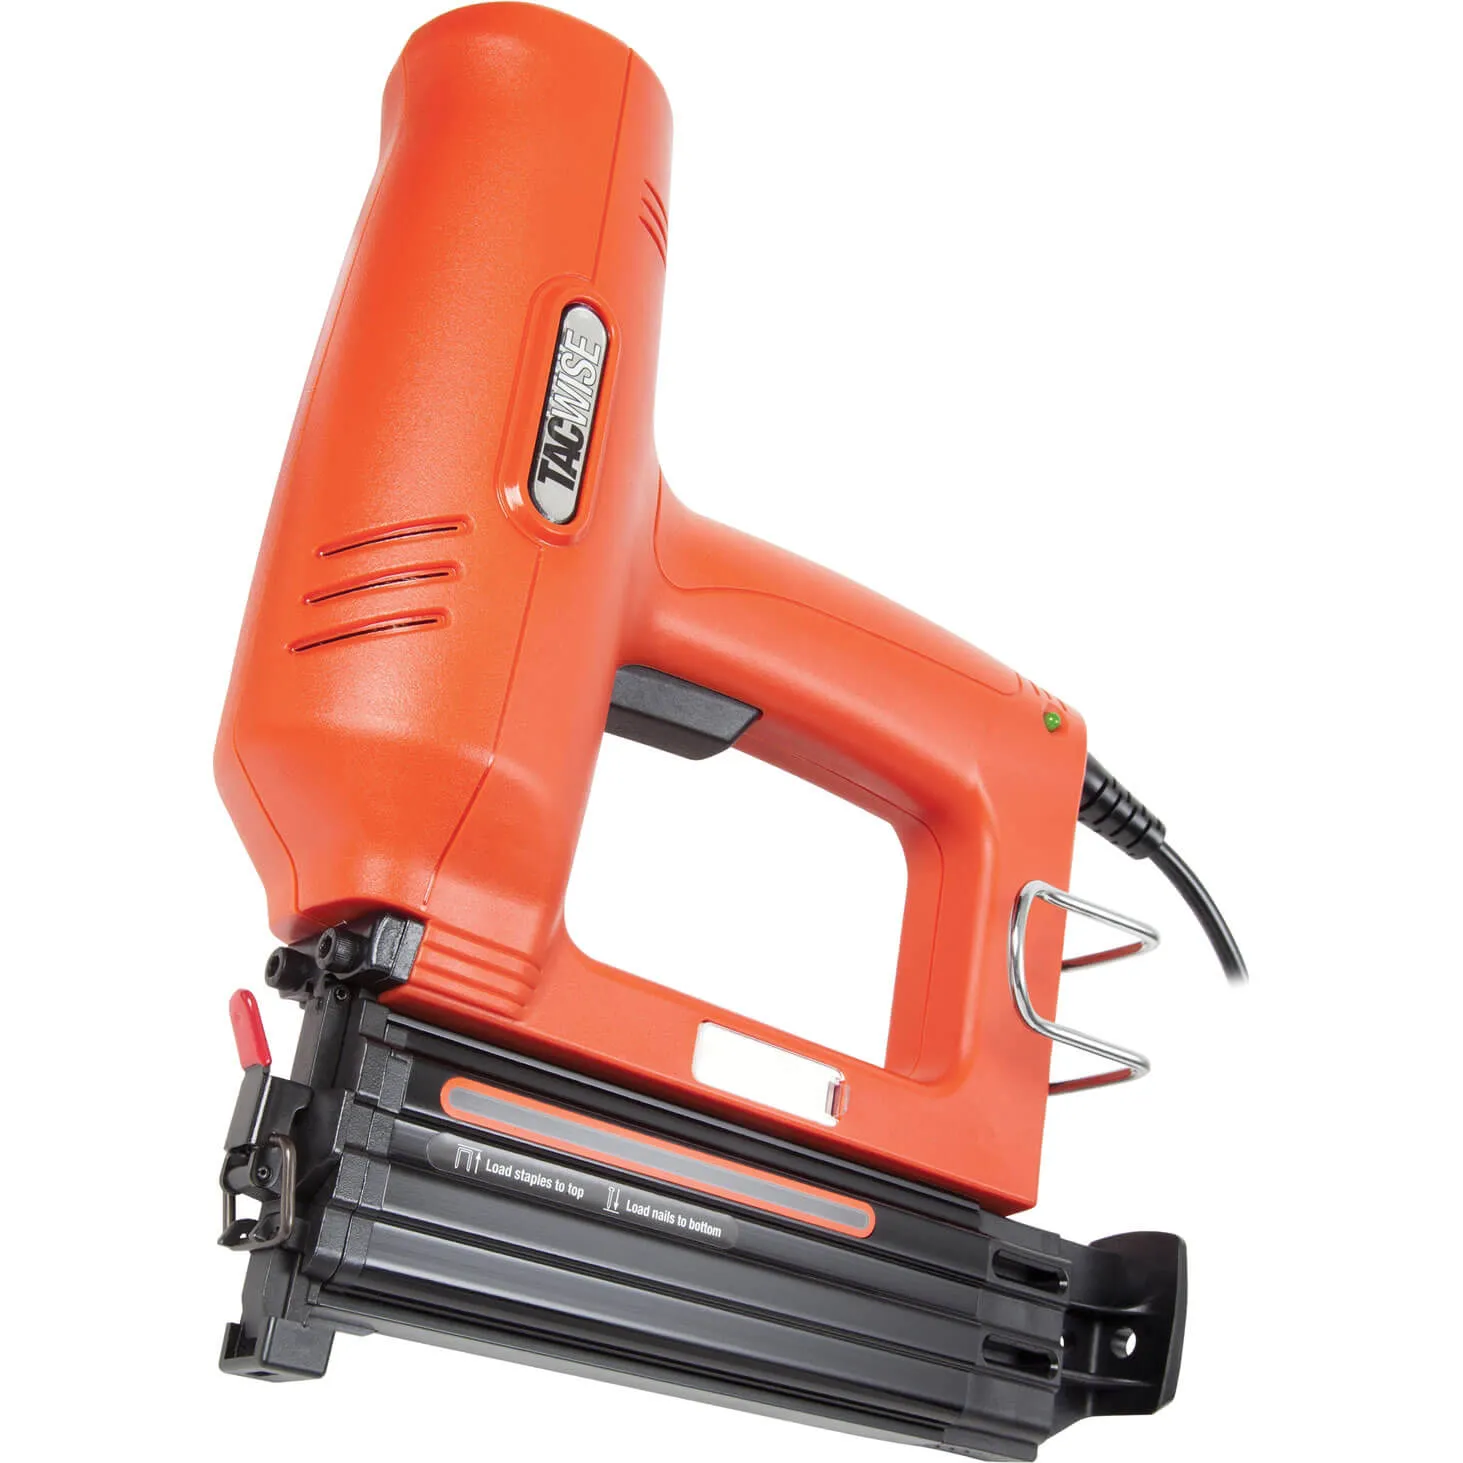 Tacwise 1166 Electric Brad Nail and Staple Gun - 240v